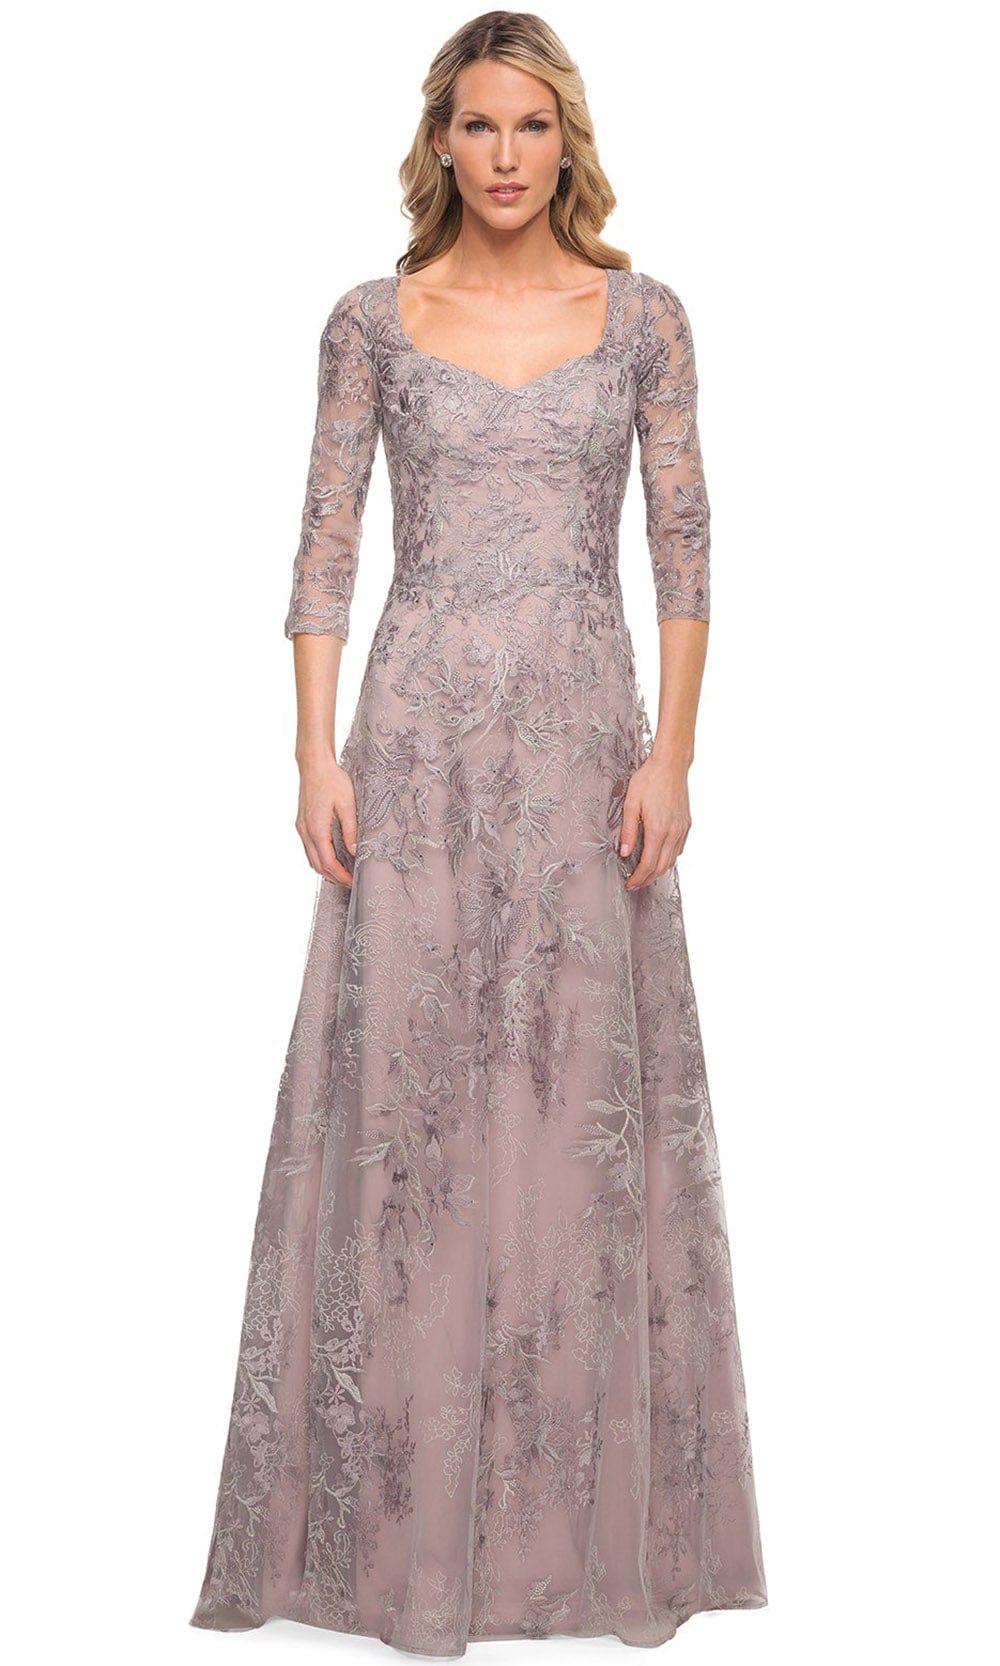 Image of La Femme 30078 - Embroidered Sheer Mother of the Groom Sheath Dress